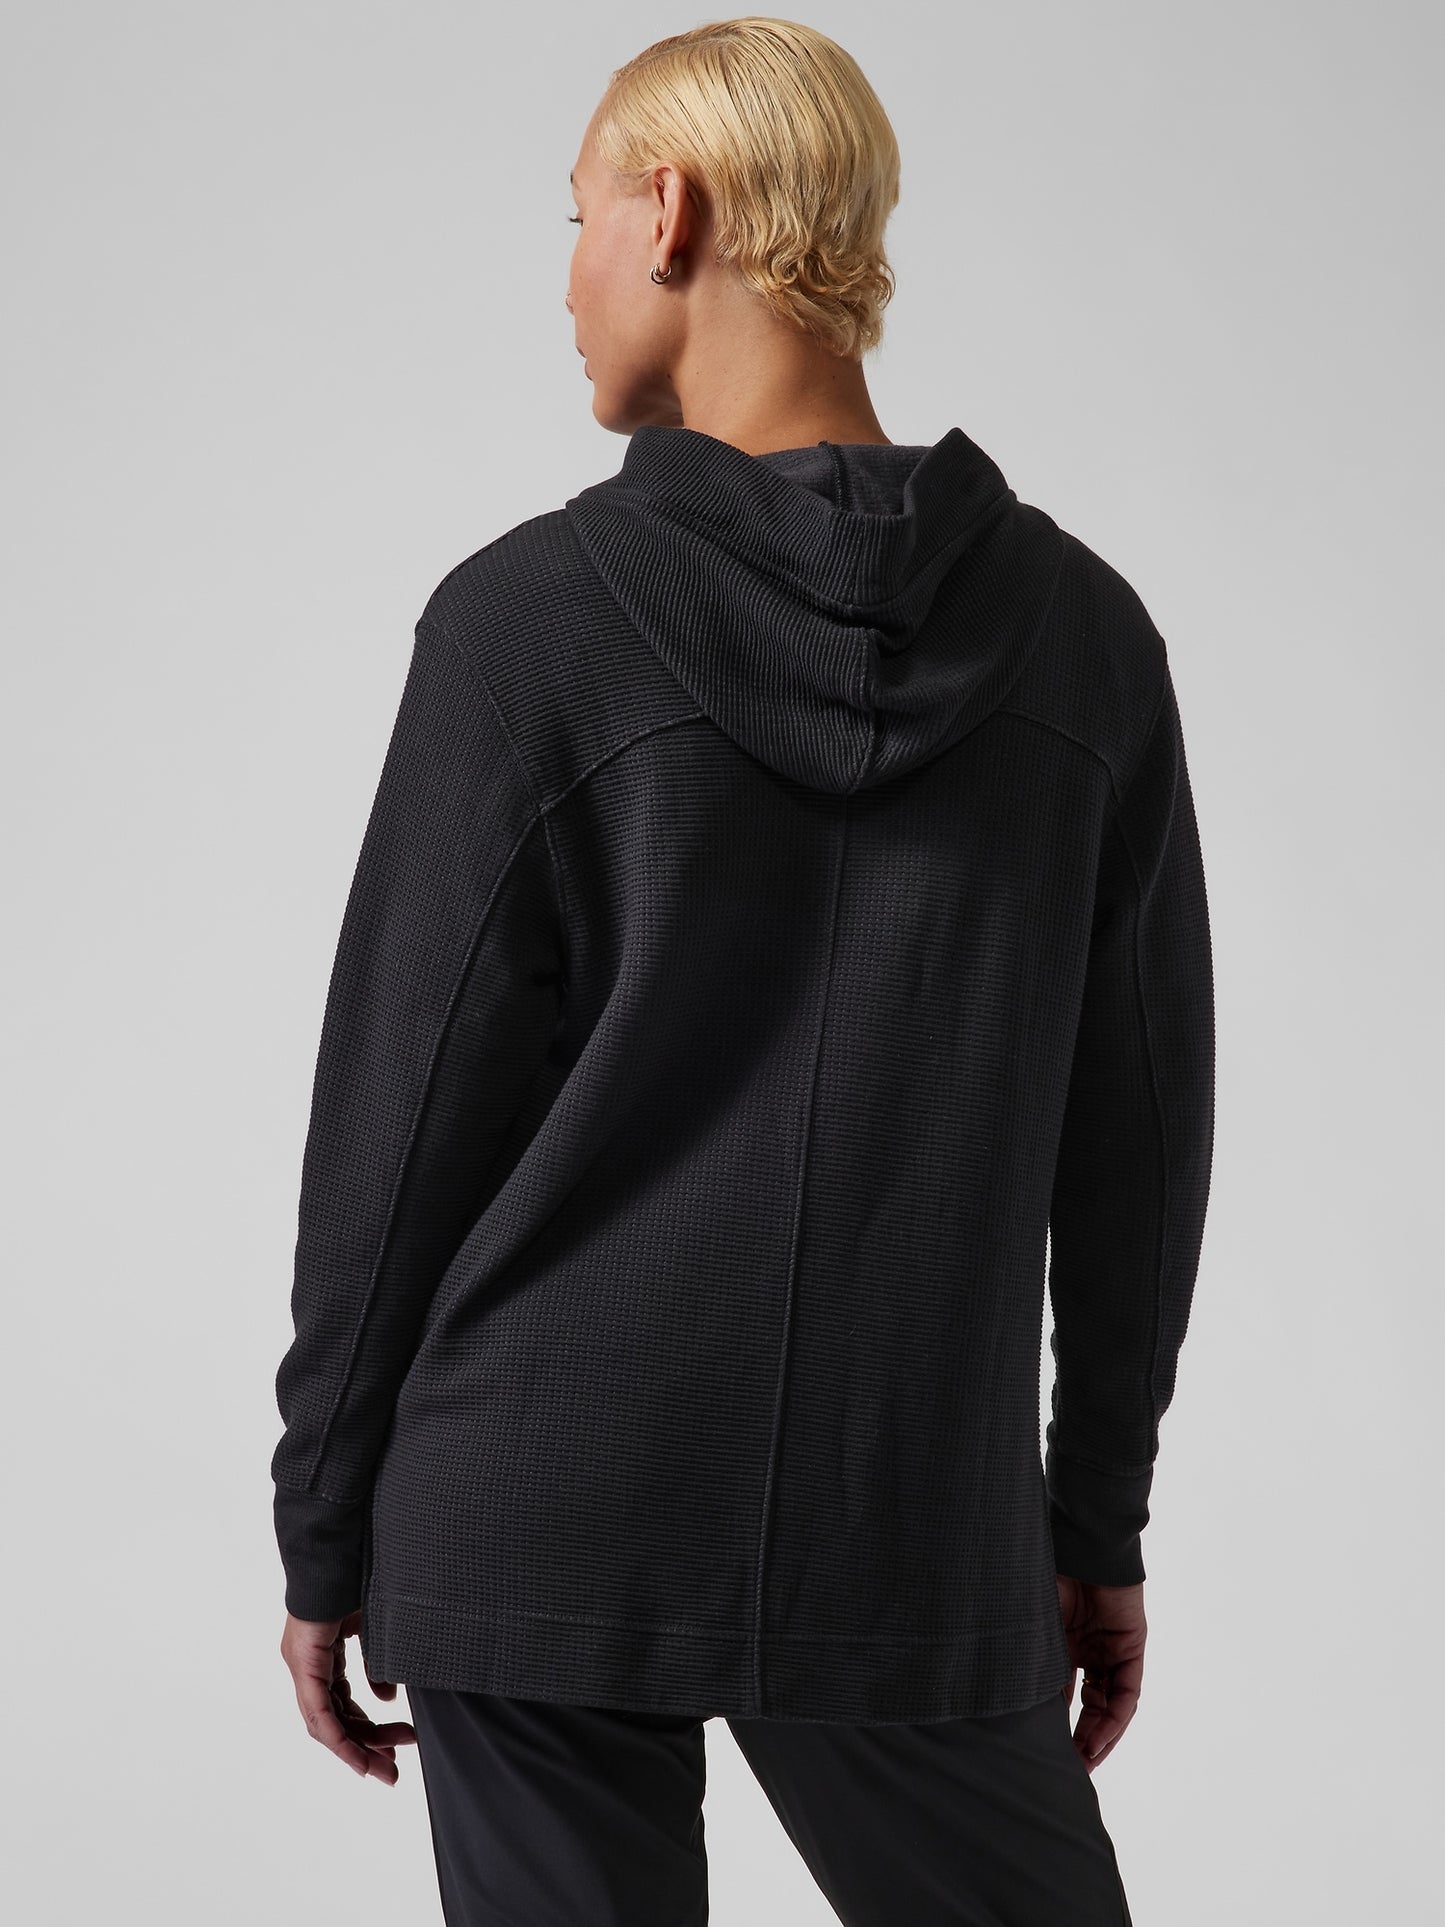 ATH Coaster Luxe Waffle Hoodie - Black